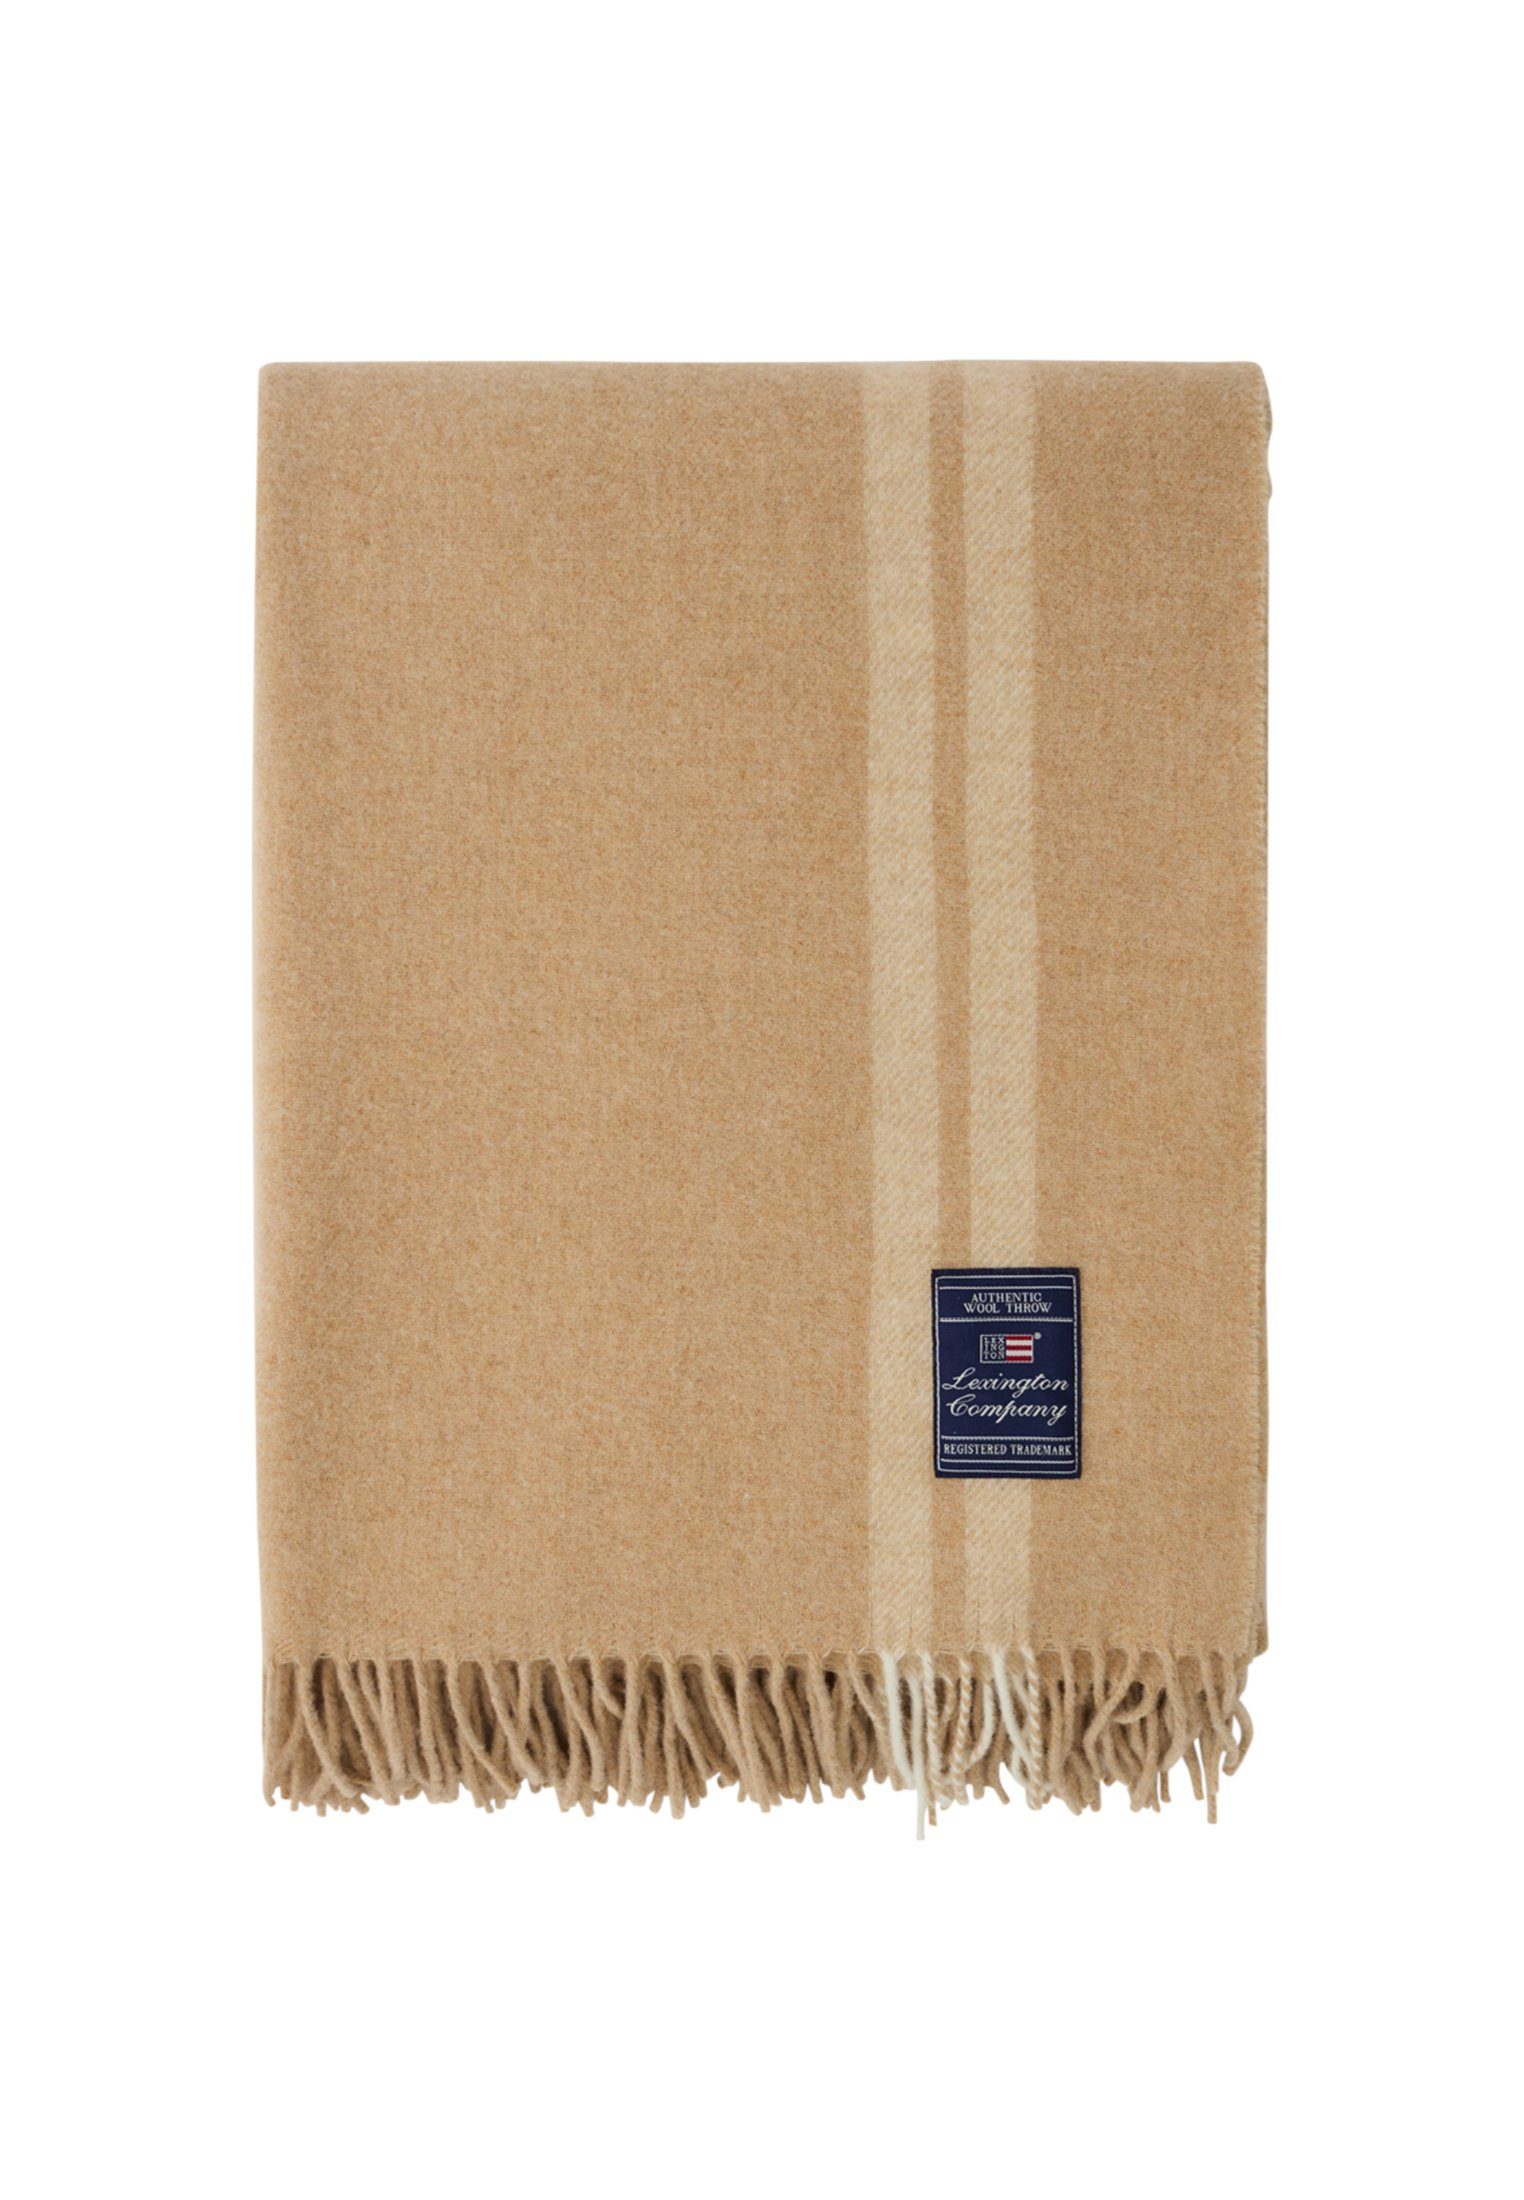 Plaid Wool Side Striped Throw, beige/white Recycled Lexington